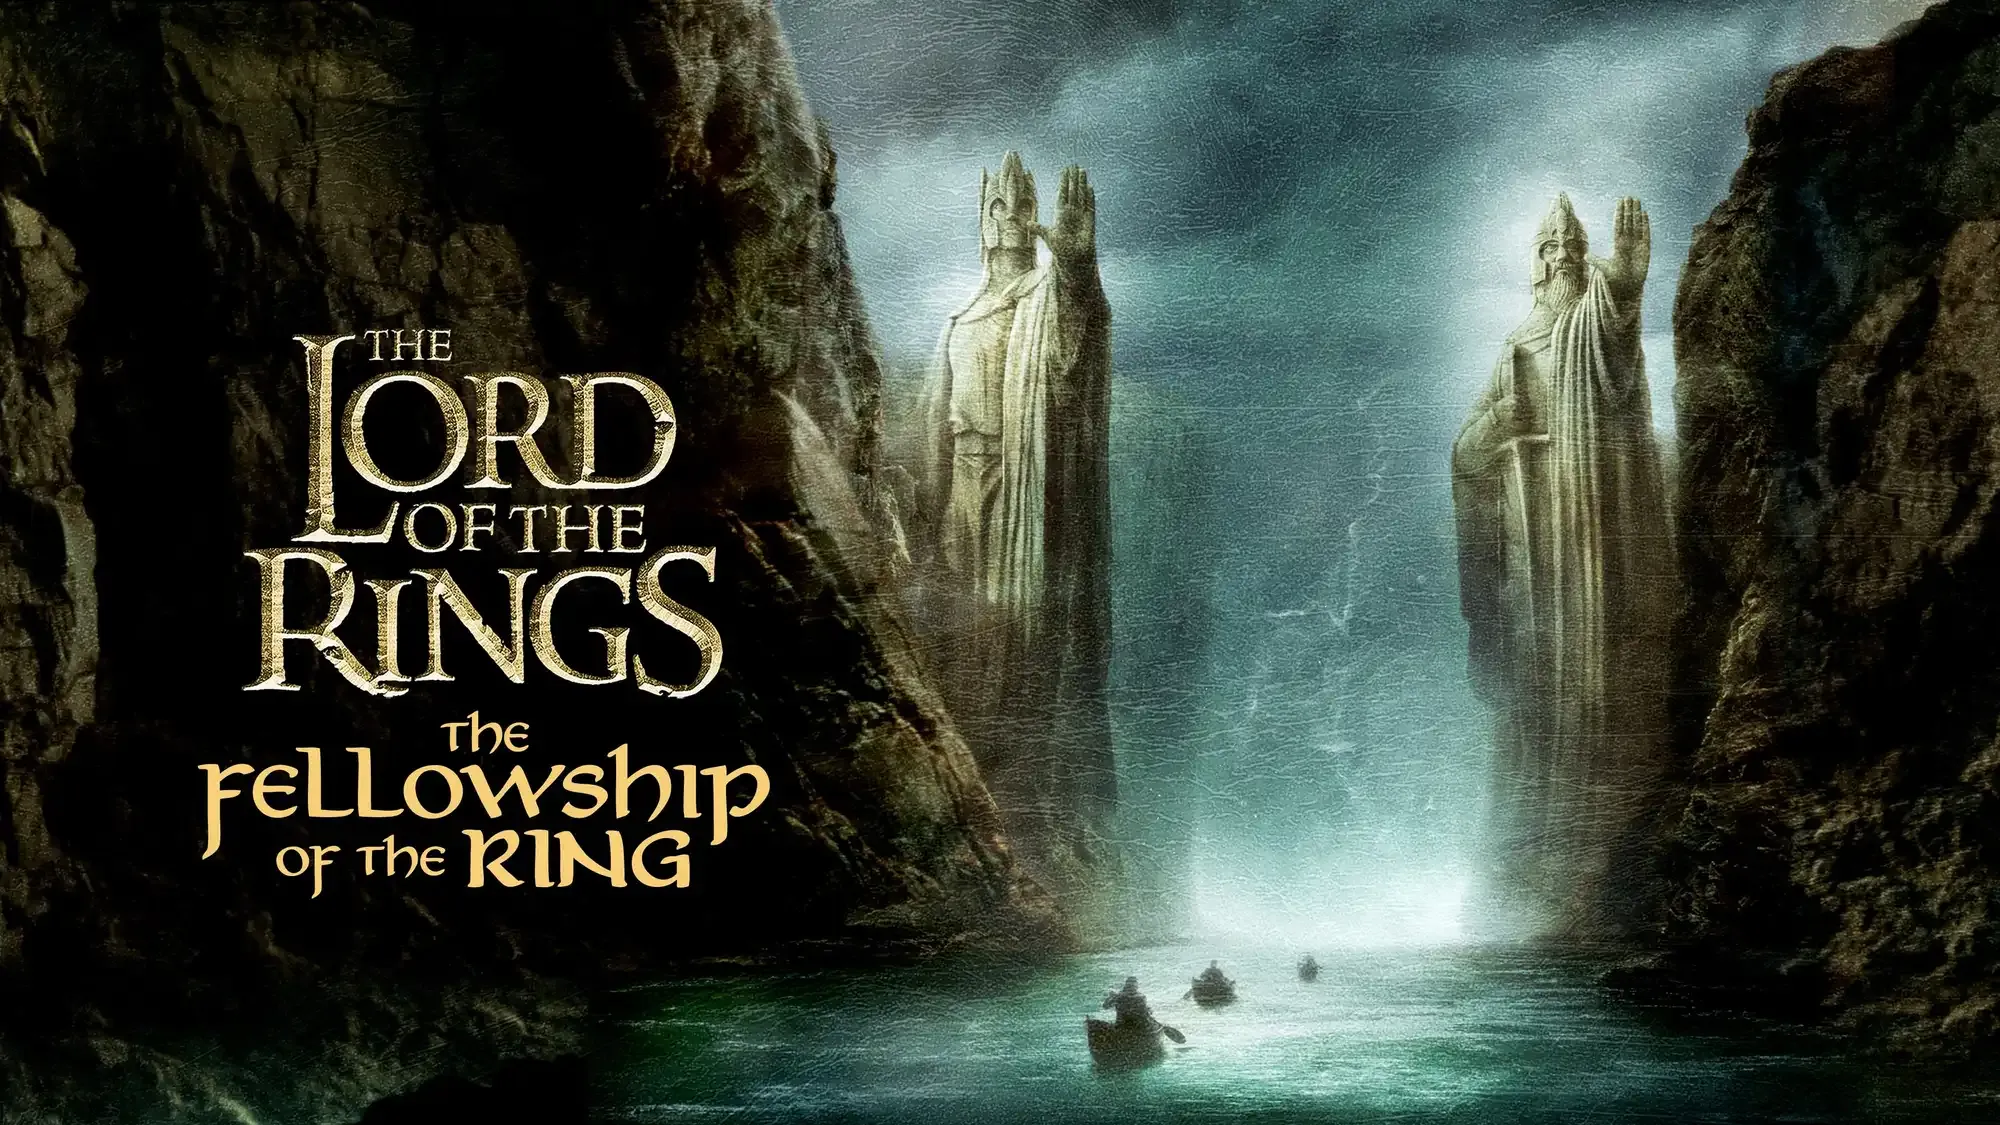 The Lord of the Rings: The Fellowship of the Ring movie review